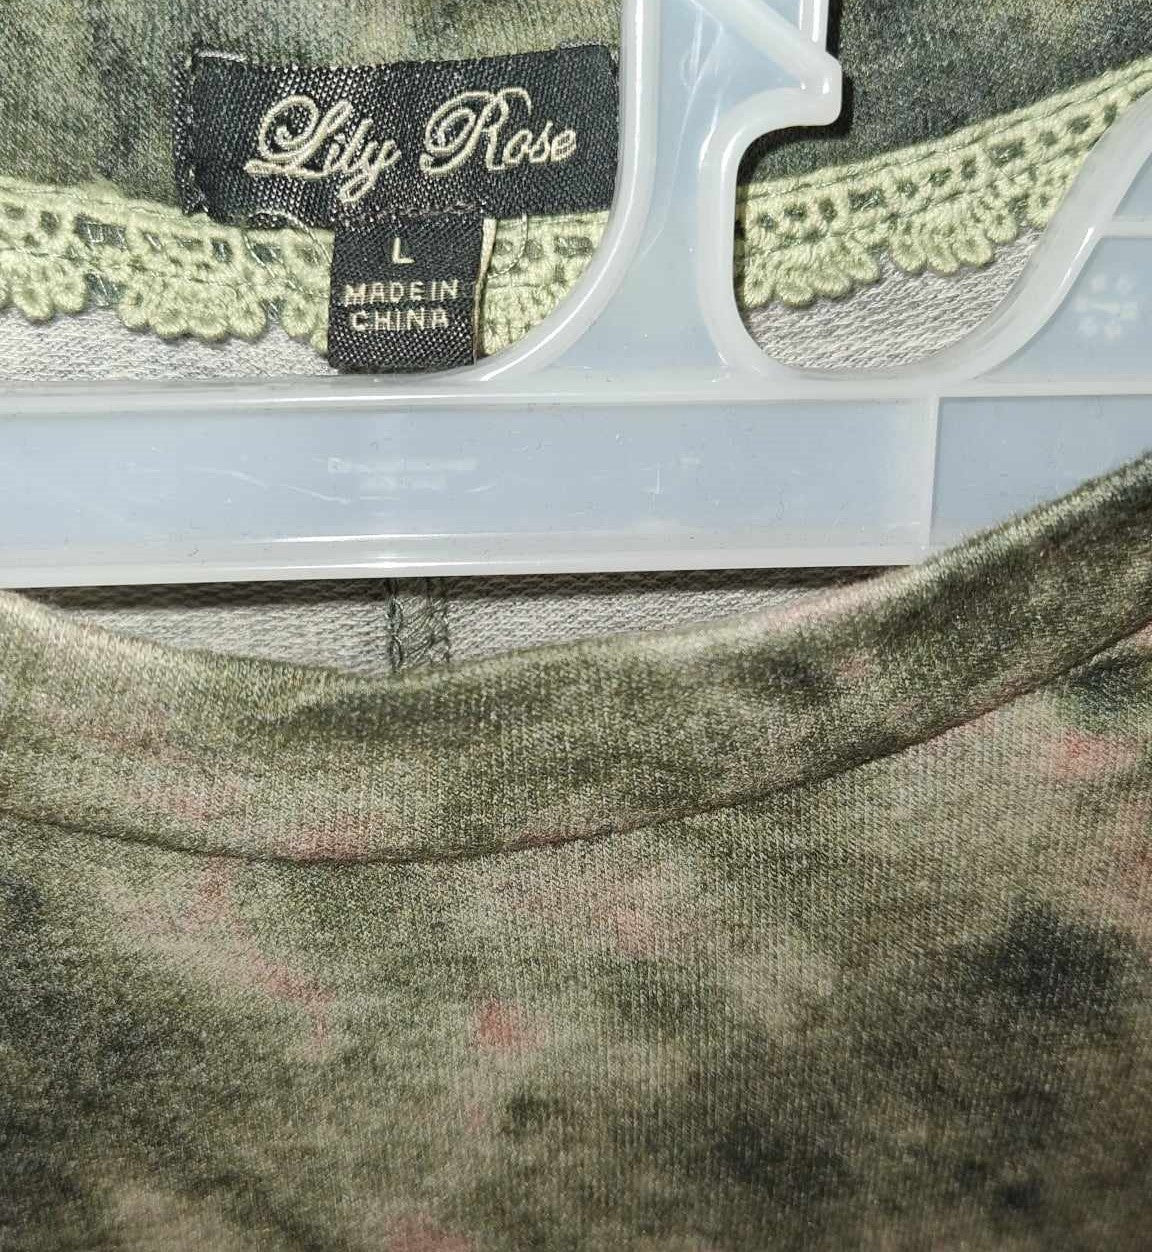 Lily Rose Green Camo T-shirt Dress - preowned